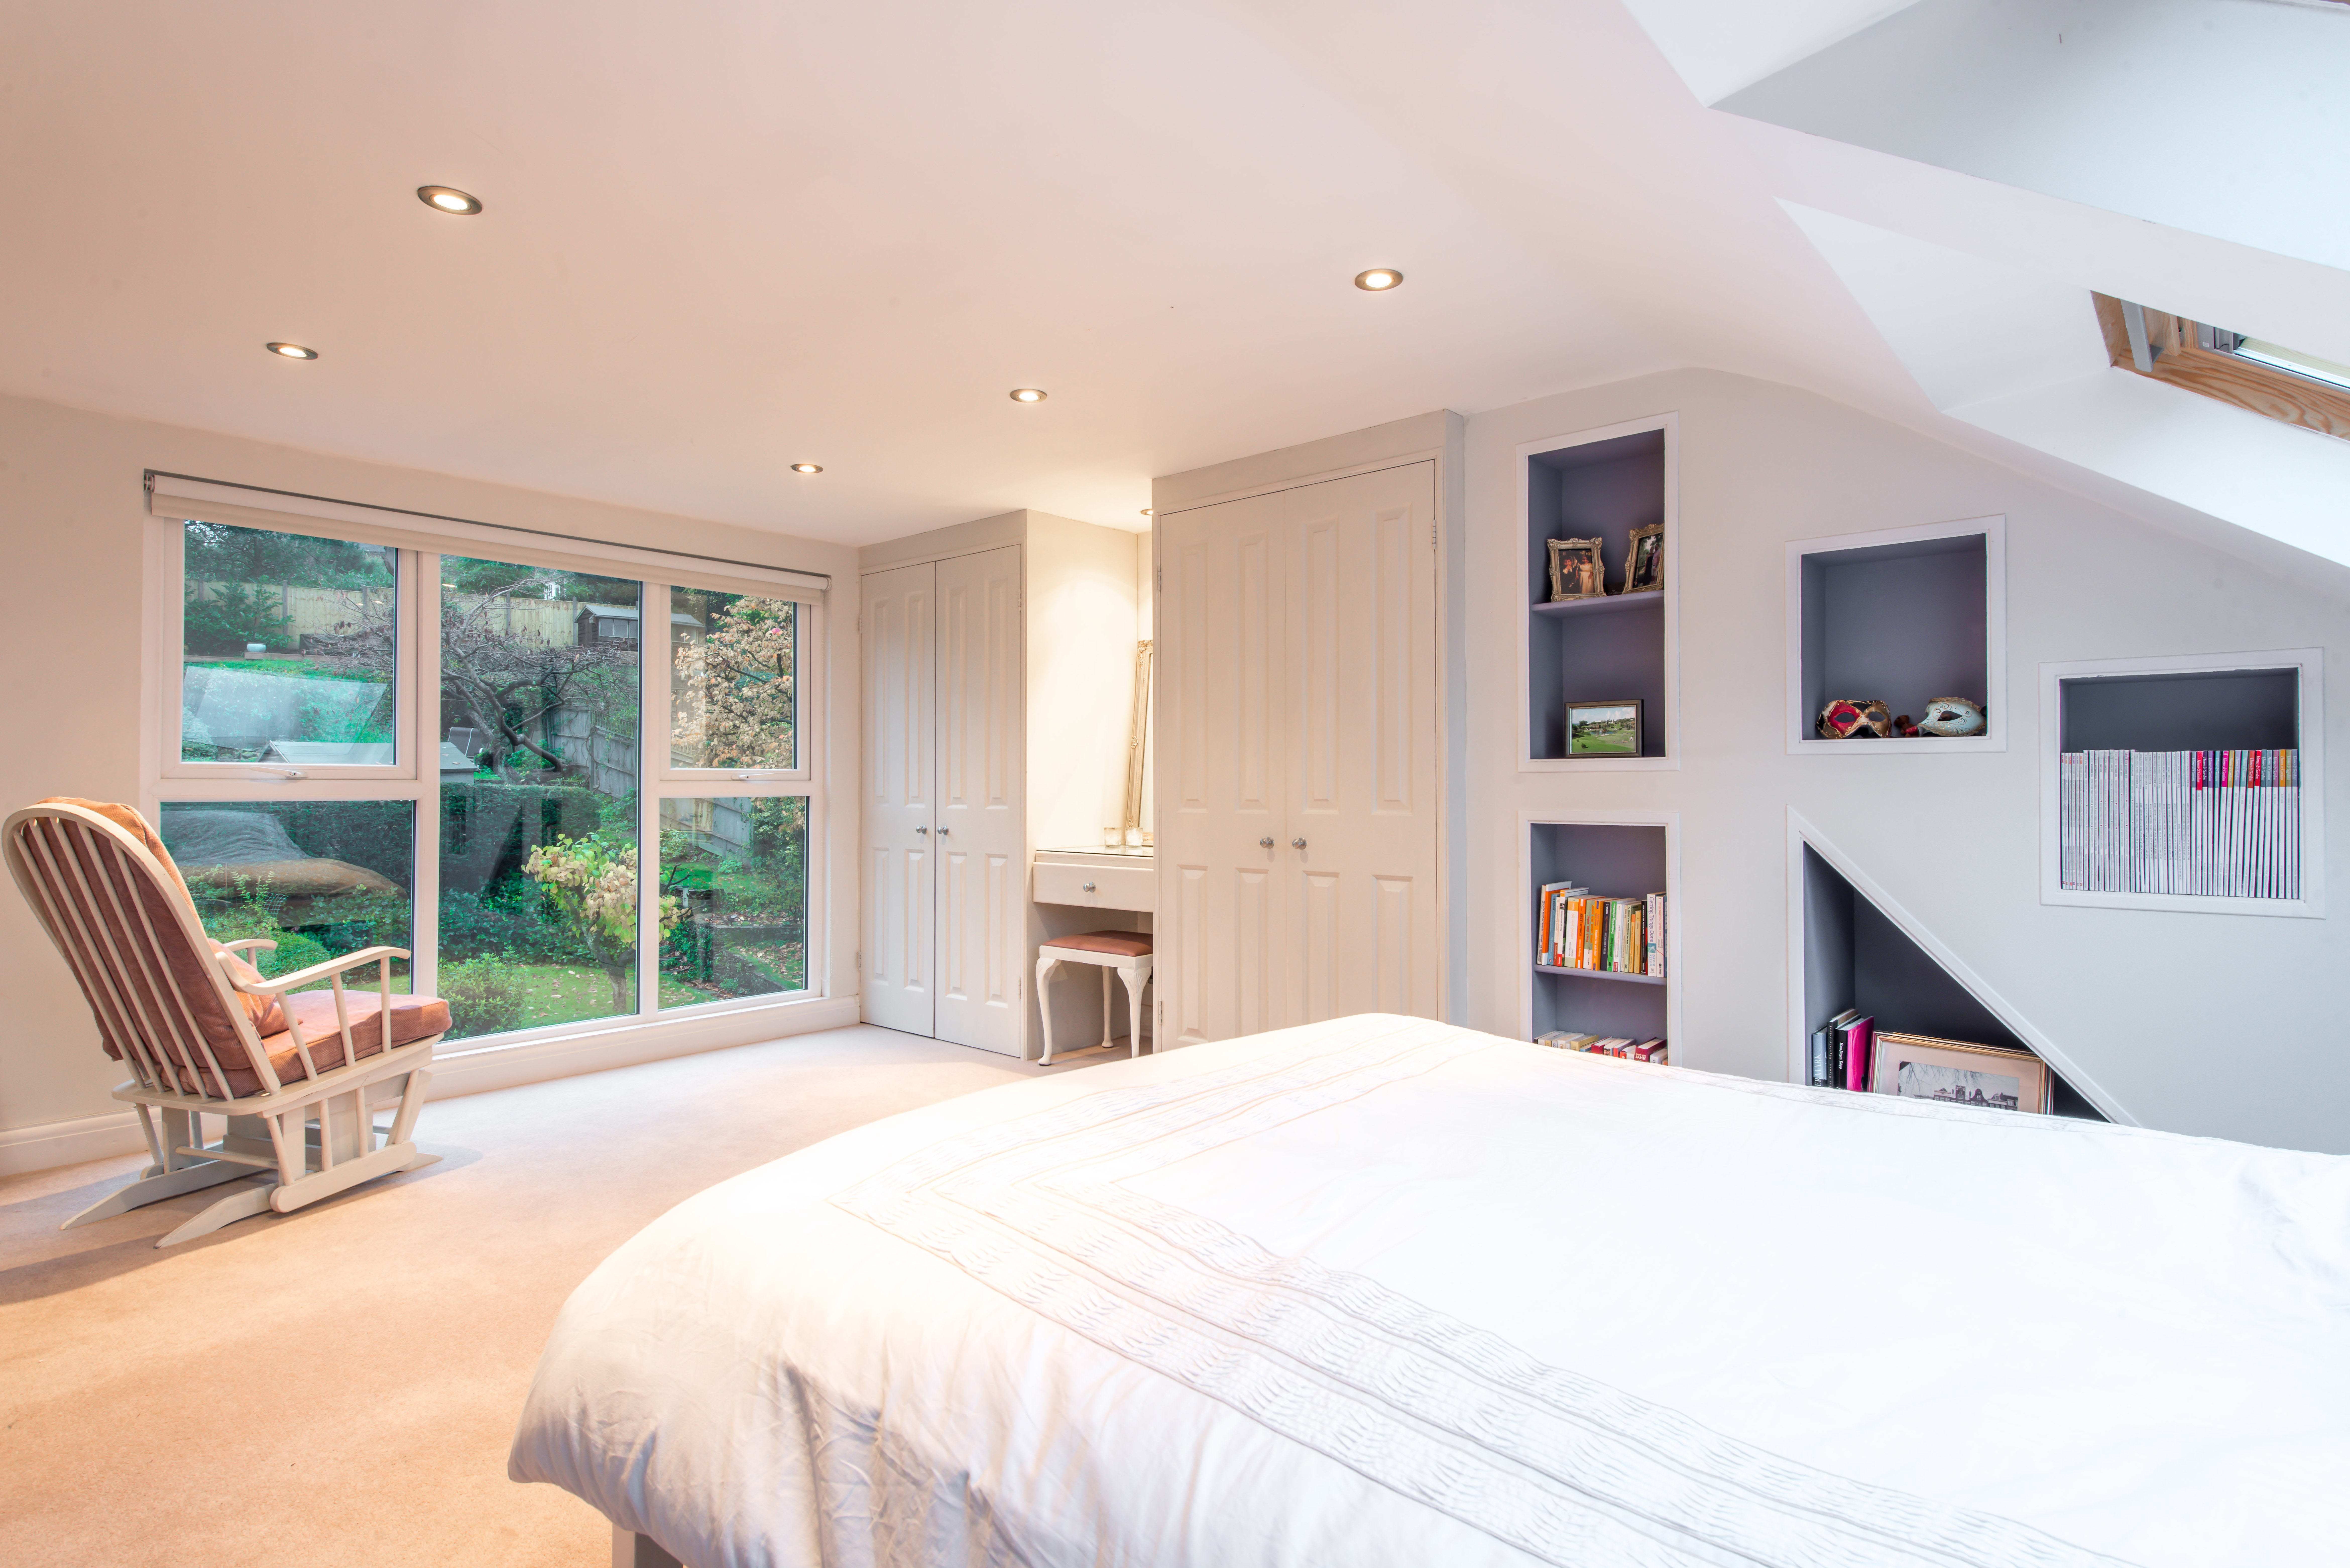 Loft Conversion Costs 2021 And How To, How Do I Convert My Loft Into A Bedroom